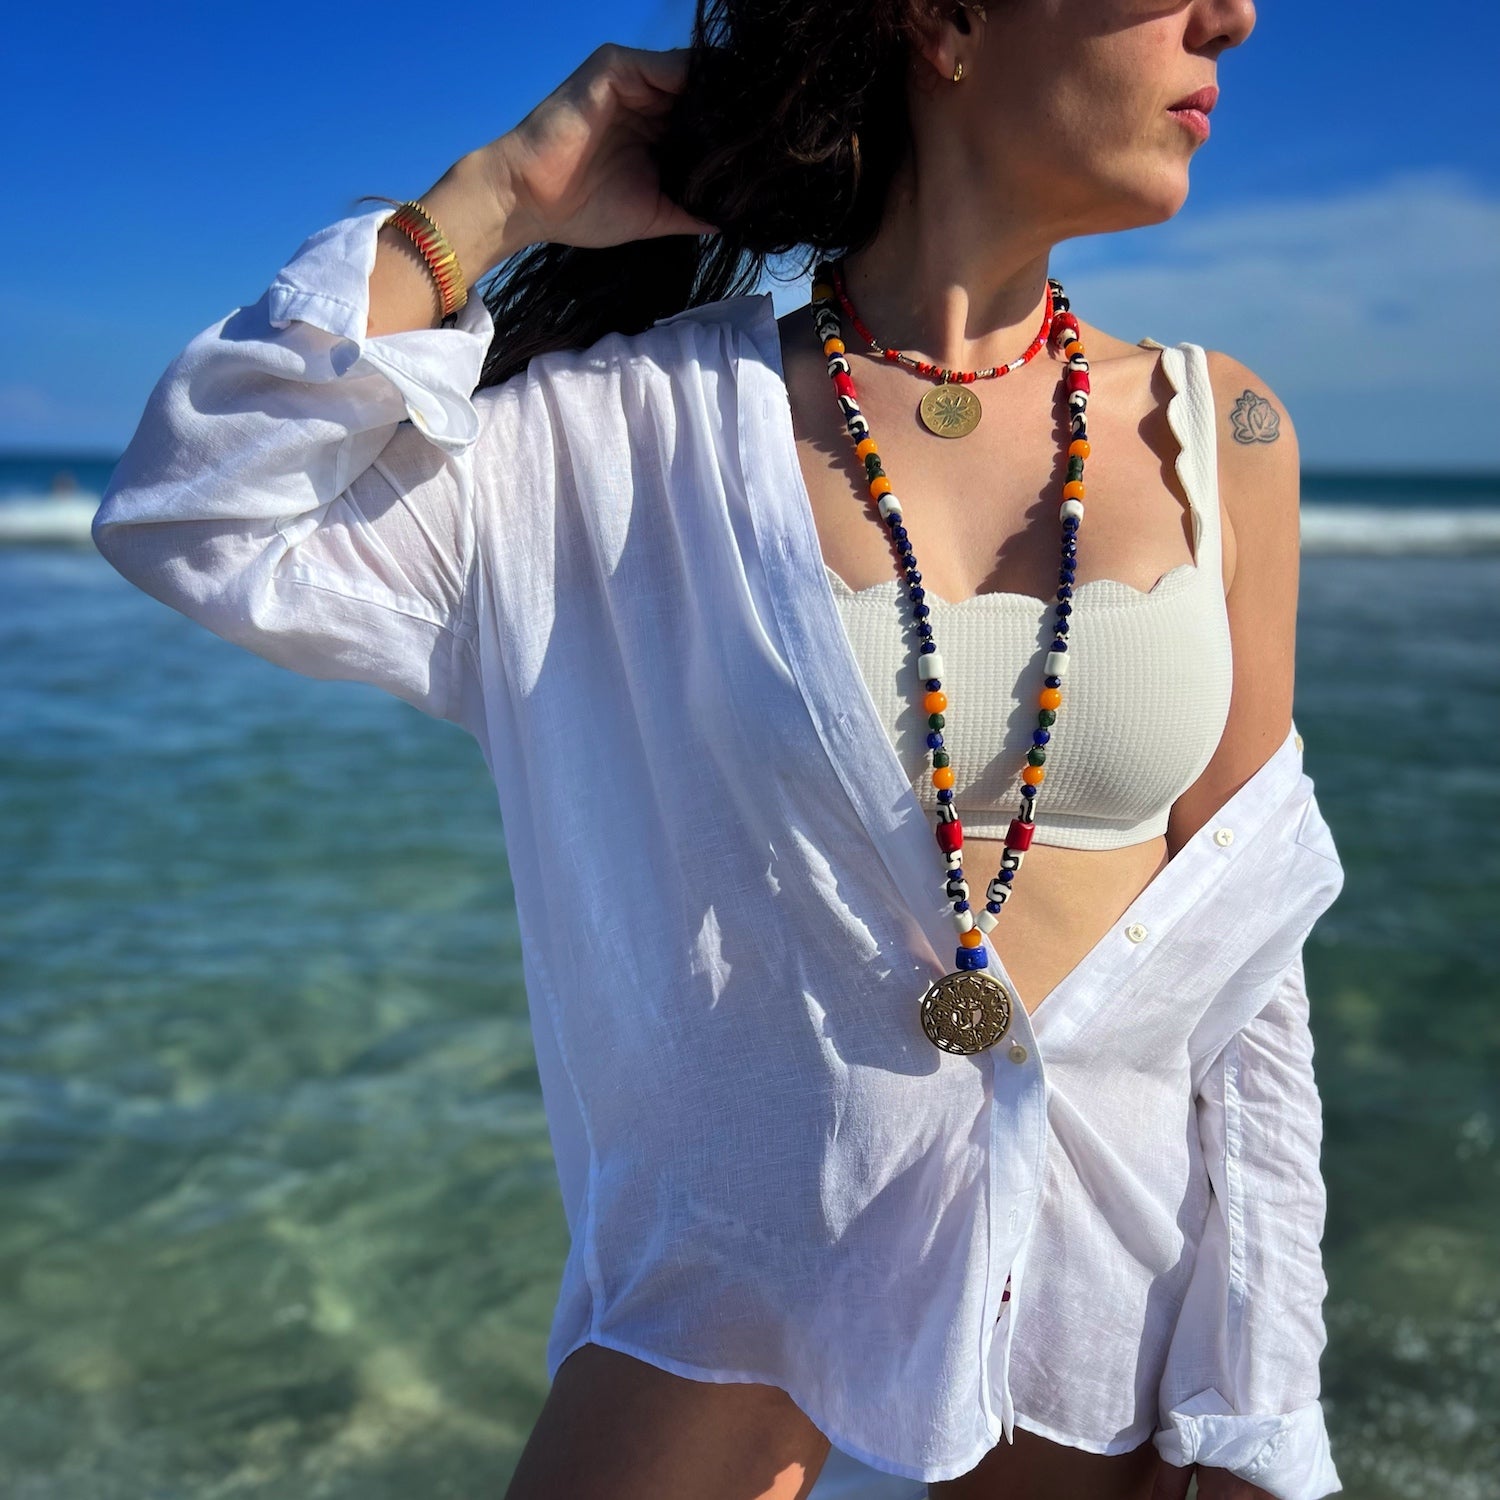 The model radiates tranquility while wearing the Yoga Necklace, showcasing its spiritual essence and elegance.